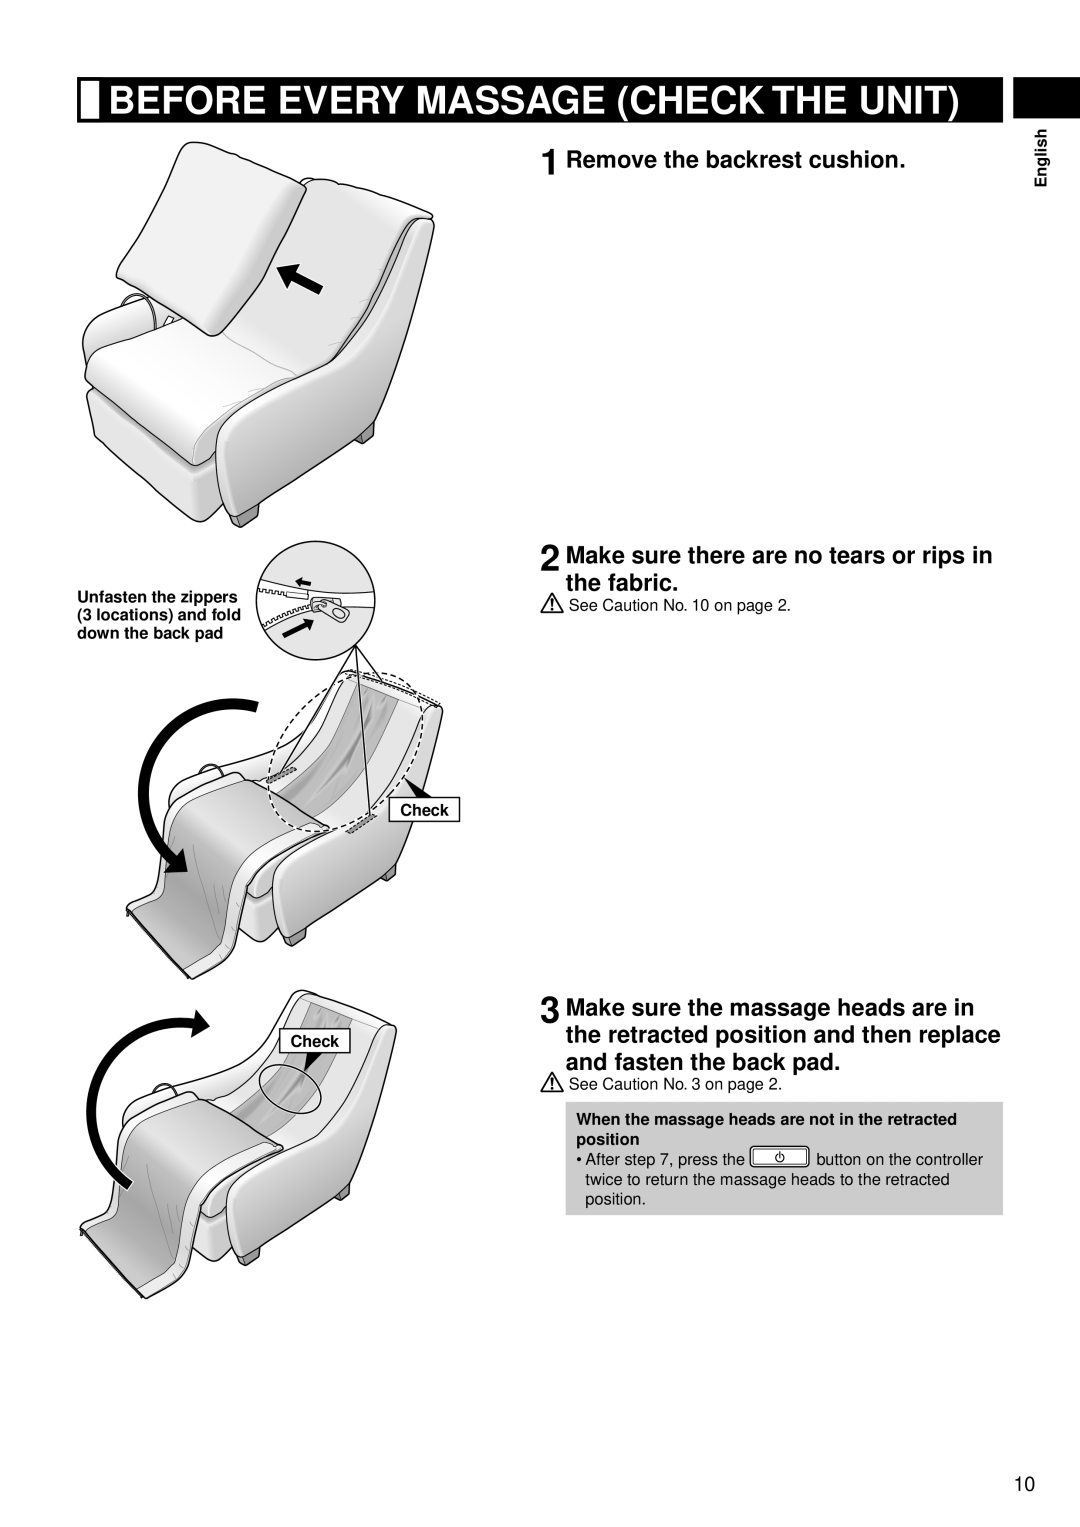 Panasonic EP-MS40 manual Before Every Massage Check The Unit, Remove the backrest cushion 